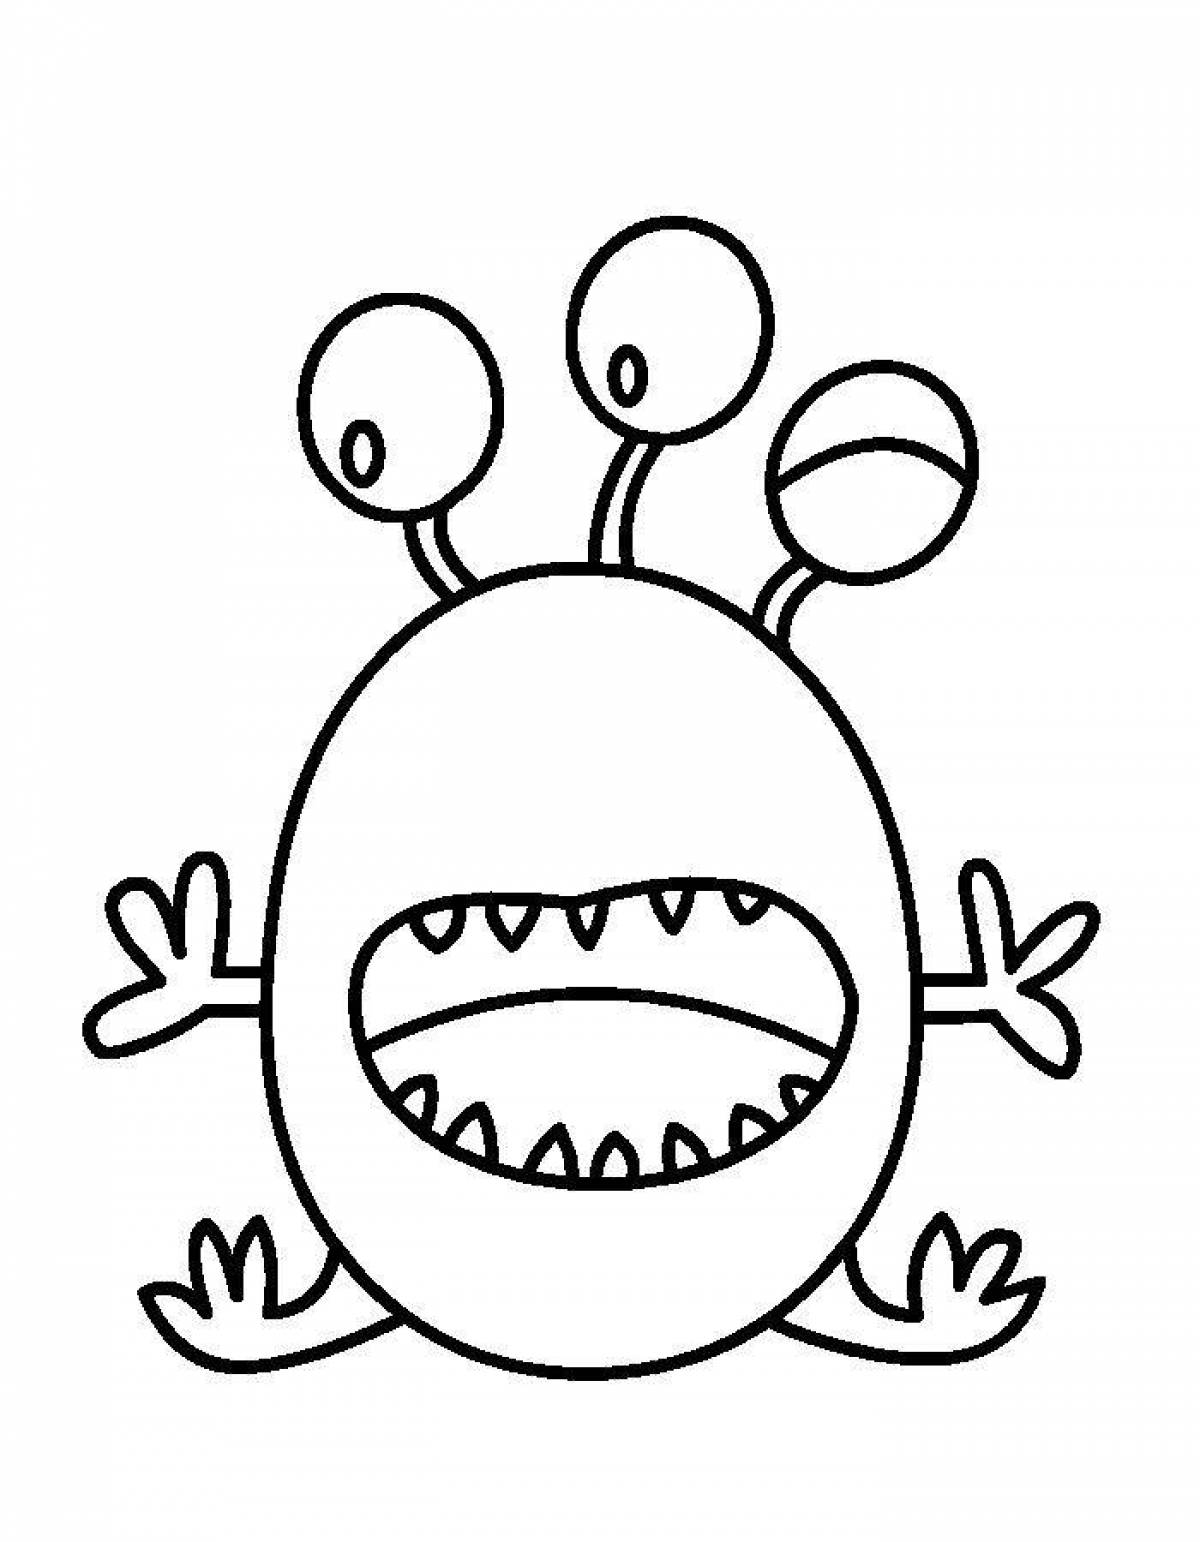 Coloring monsters for kids